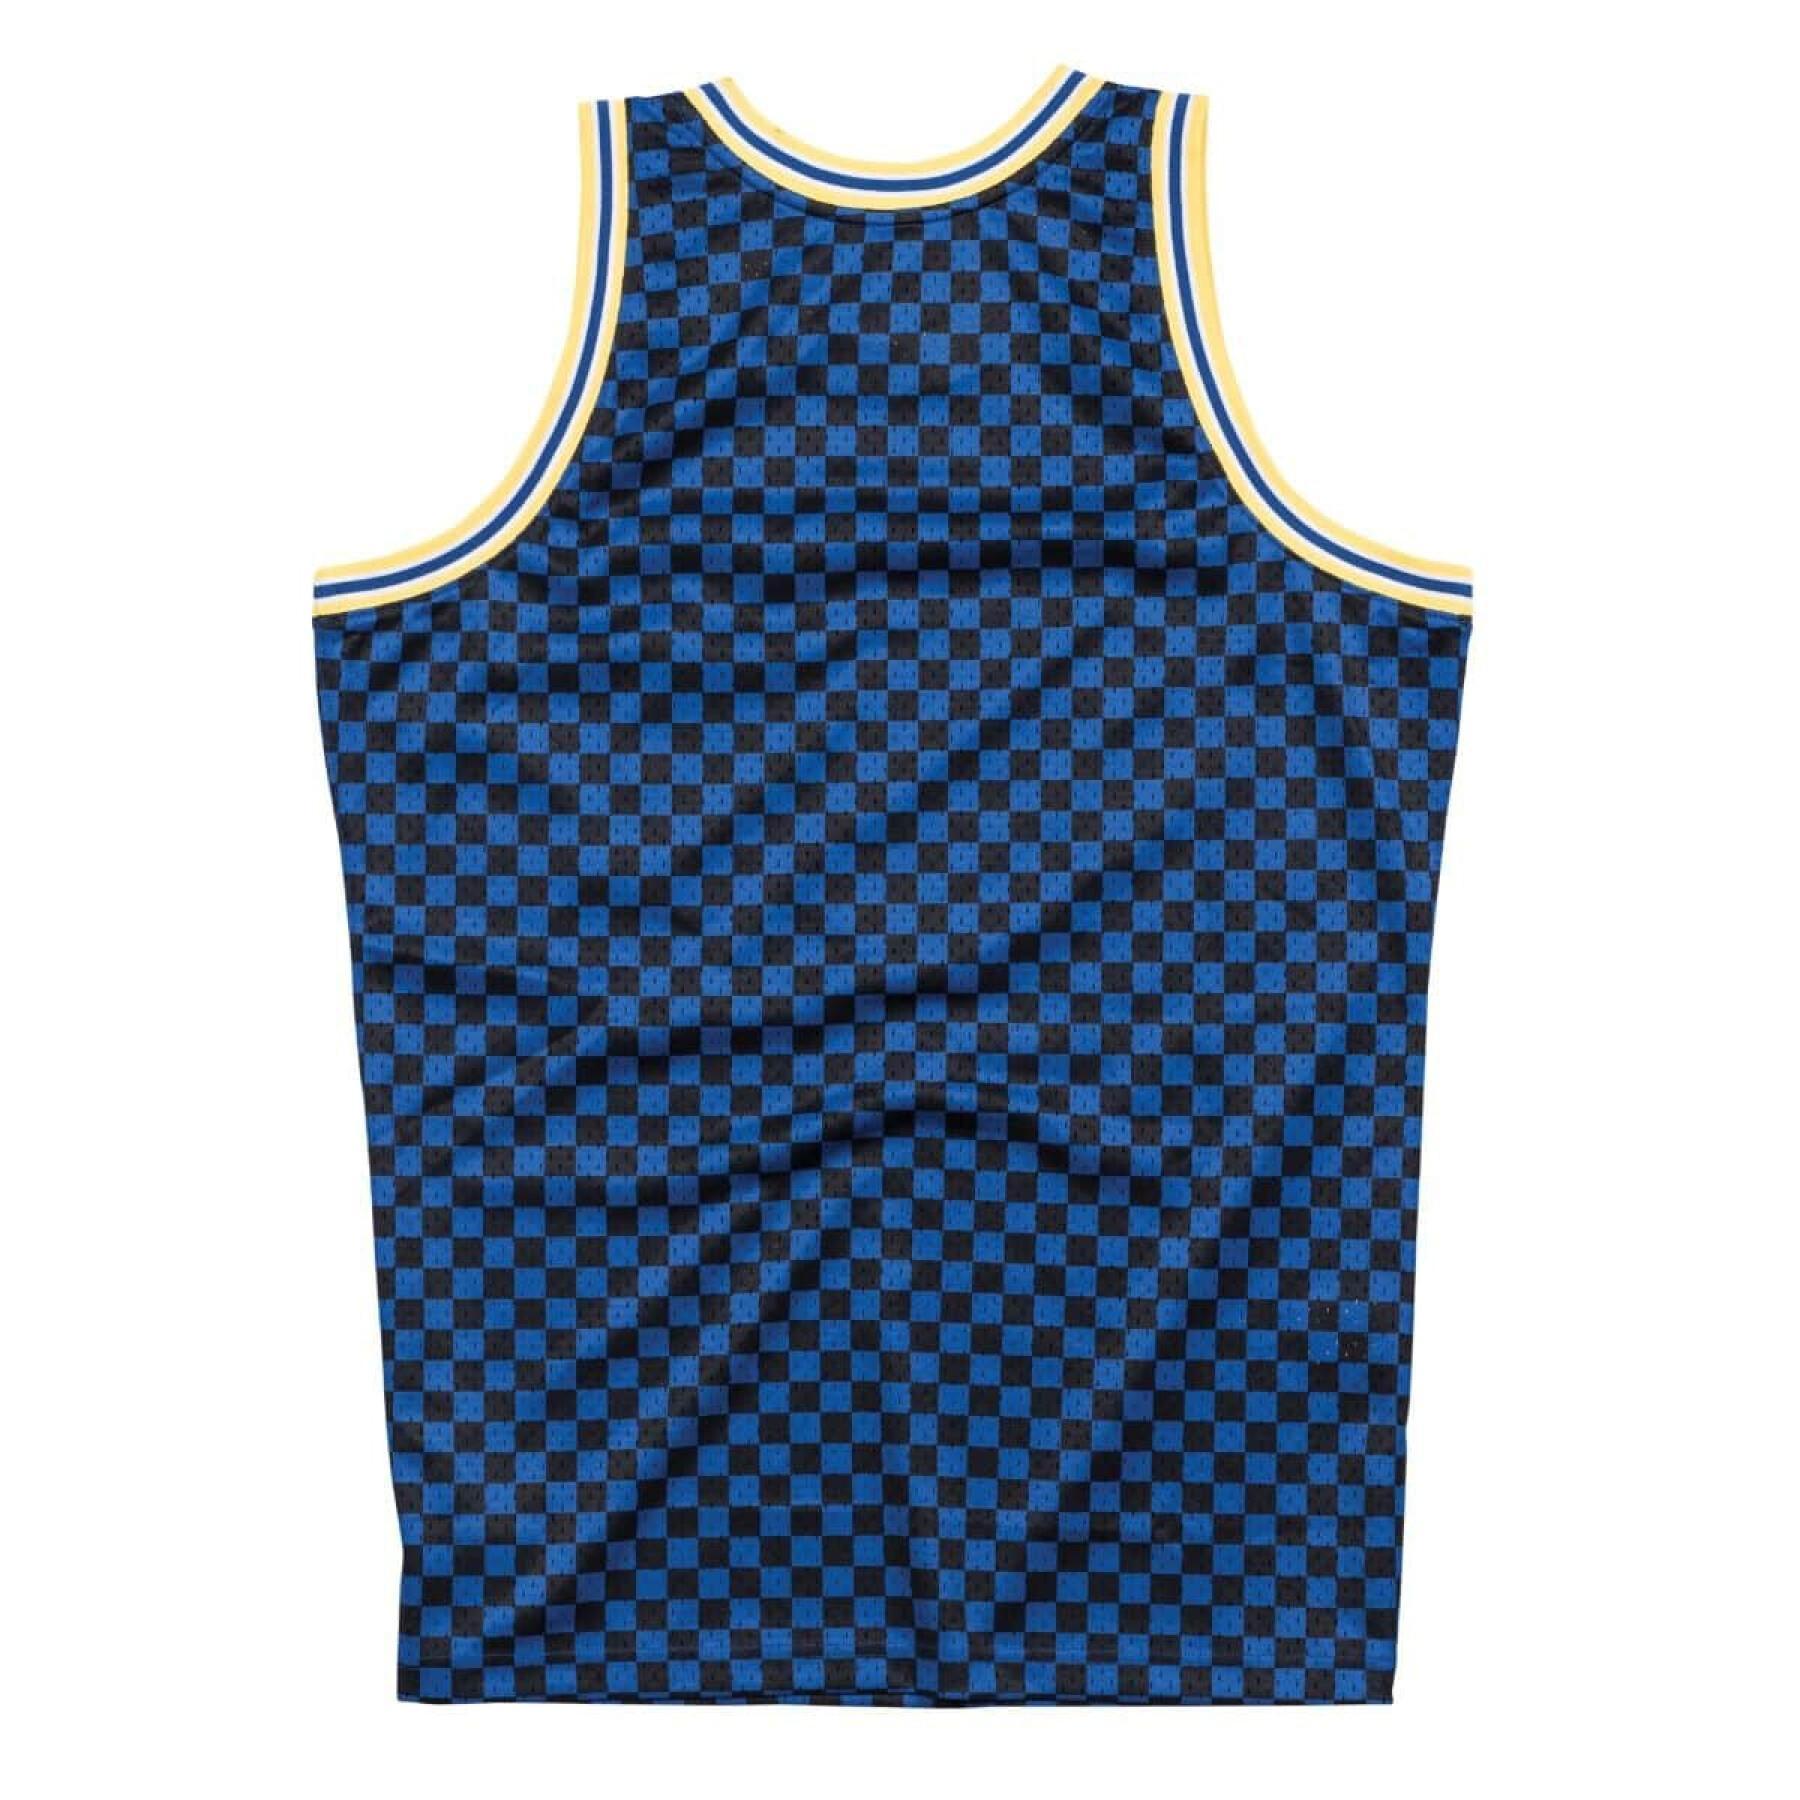 Jersey Golden State Warriors checked b&r